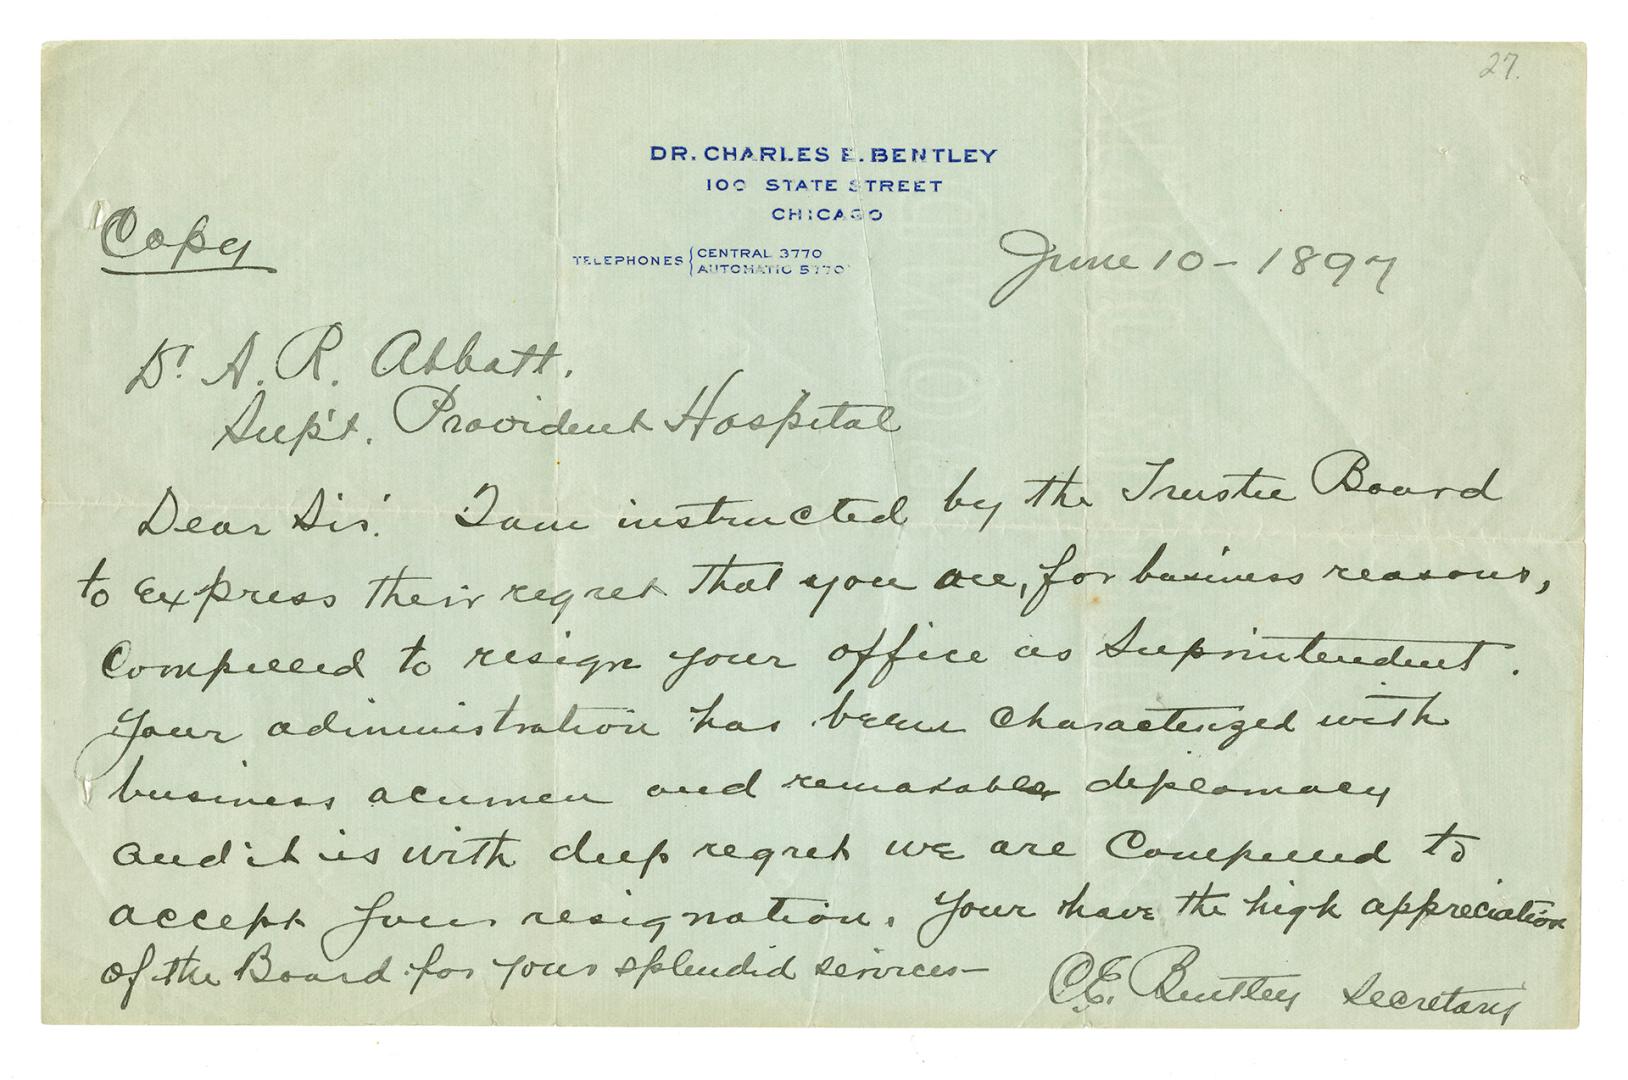 Letter to Anderson Abbott Ruffin accepting his resignation as Superintendent of Provident Hospital